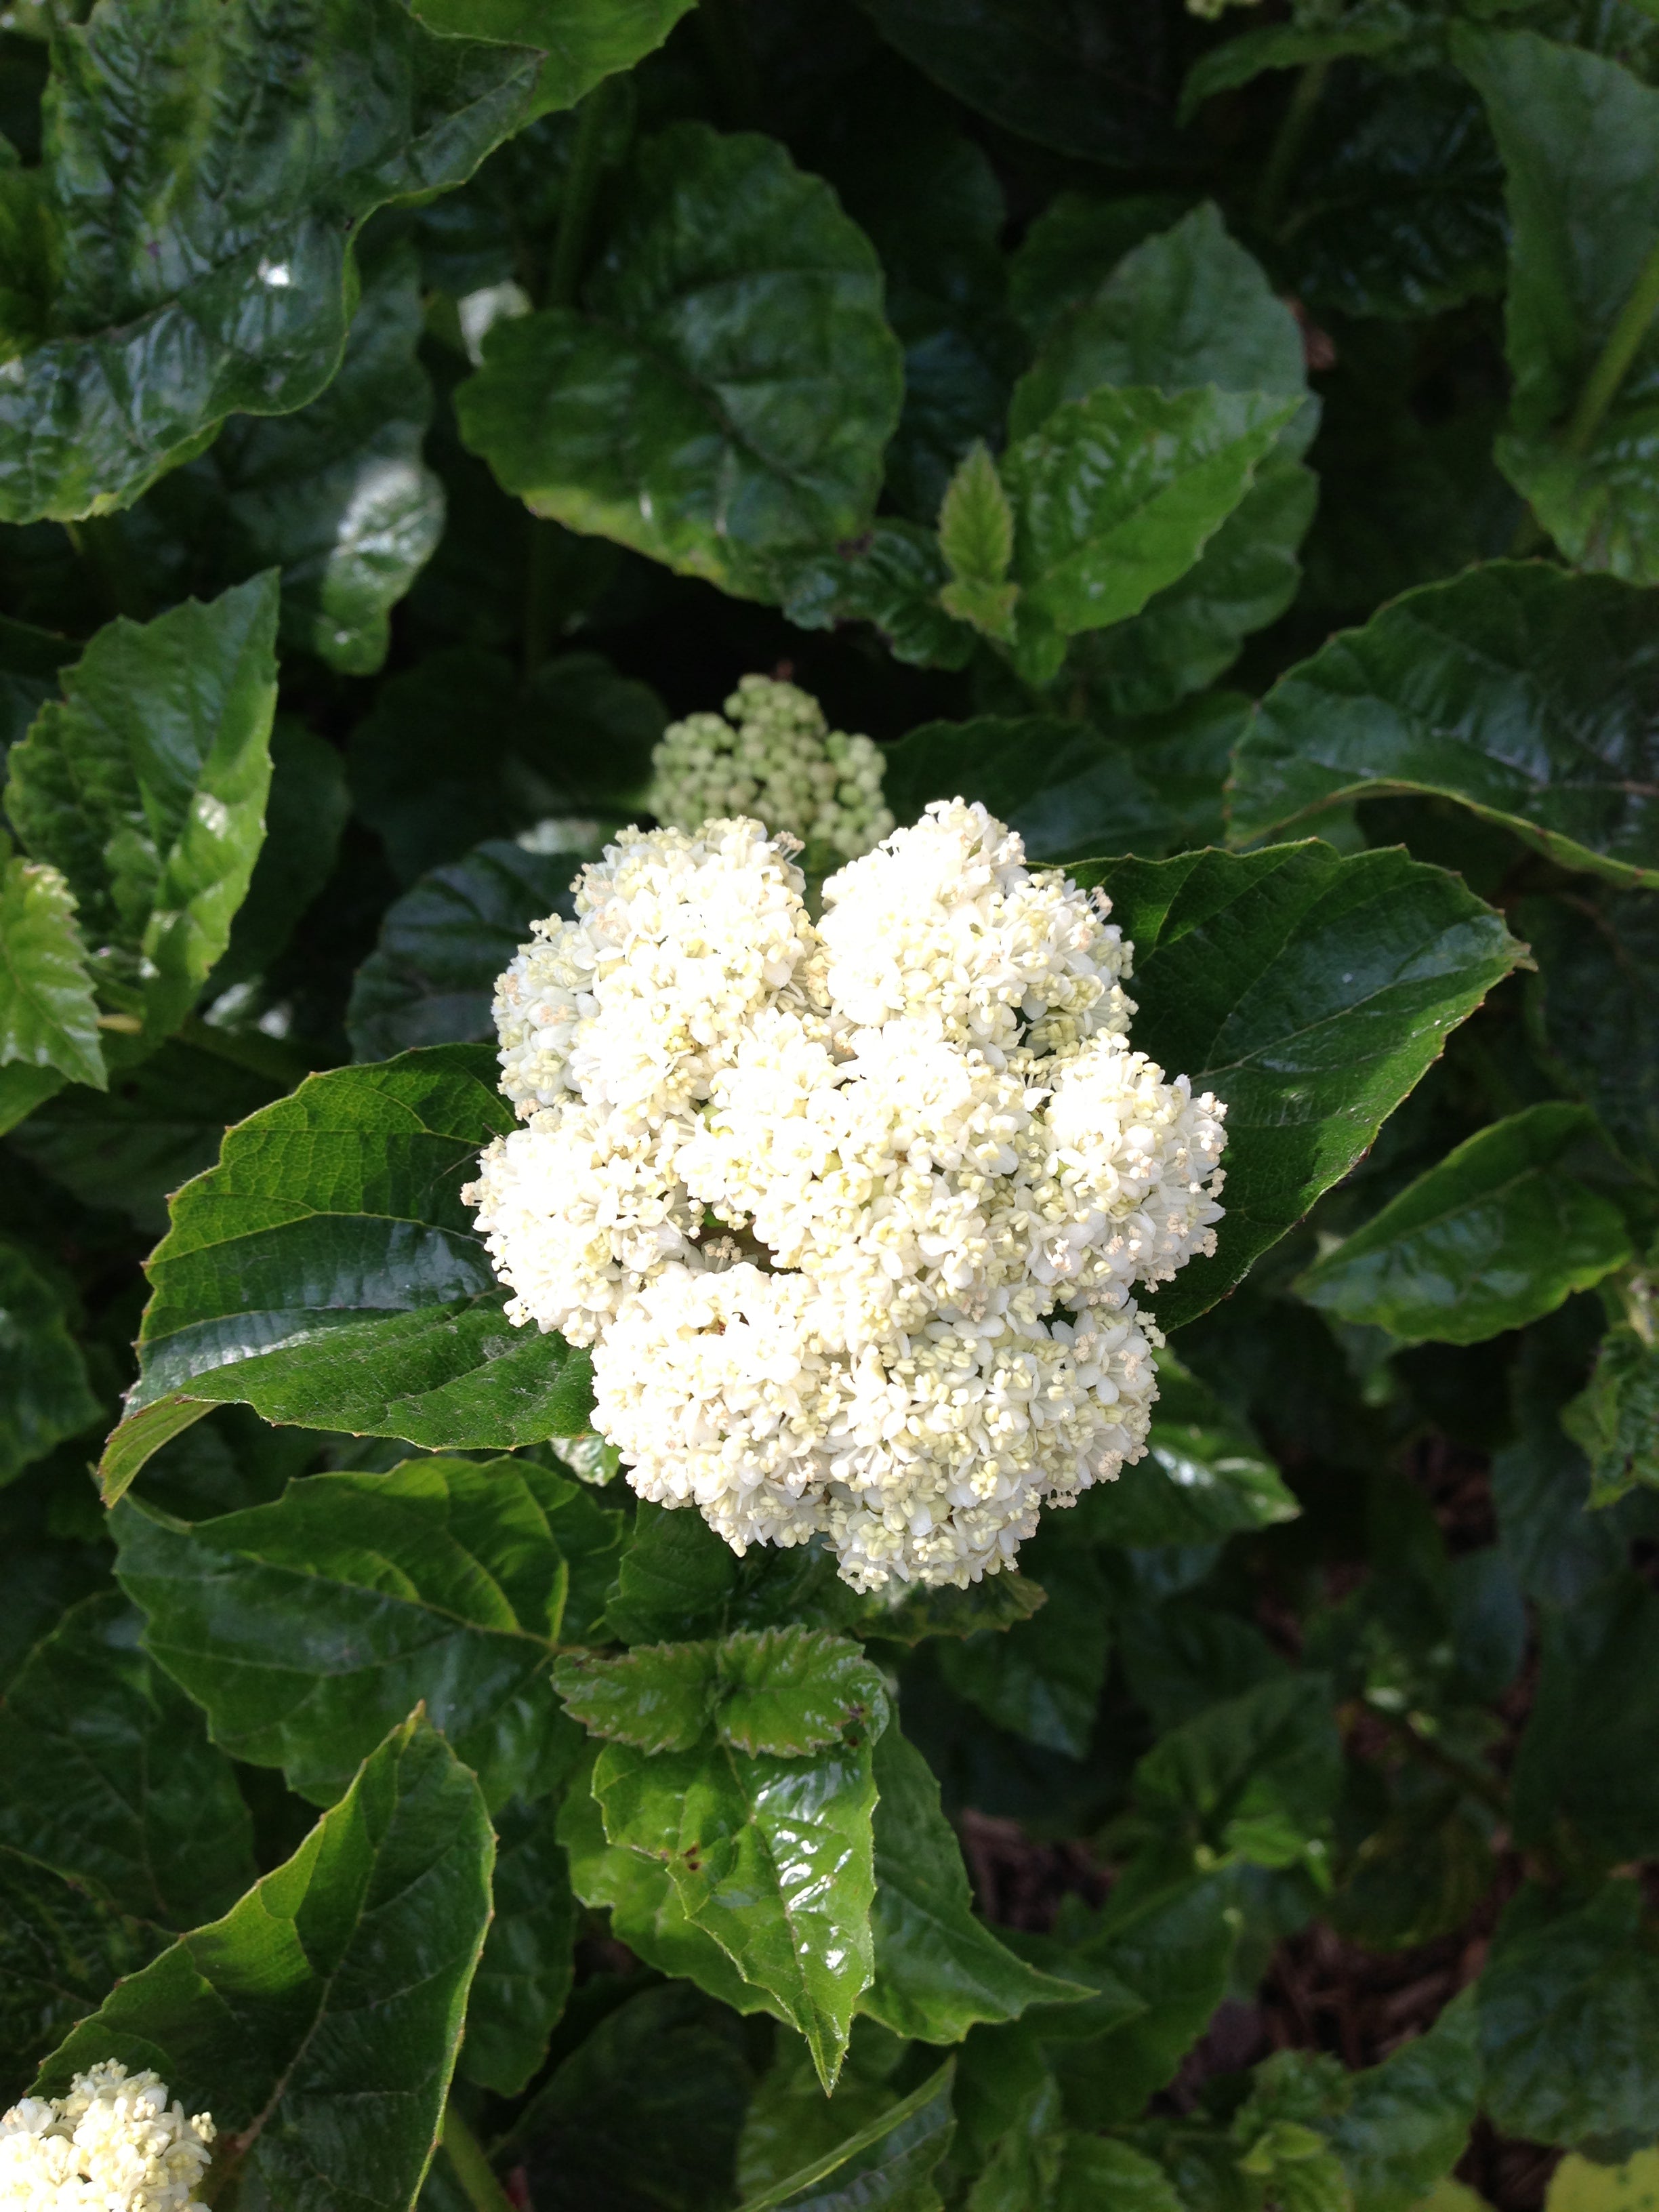 A closeup of a flower on All That Glows viburnum